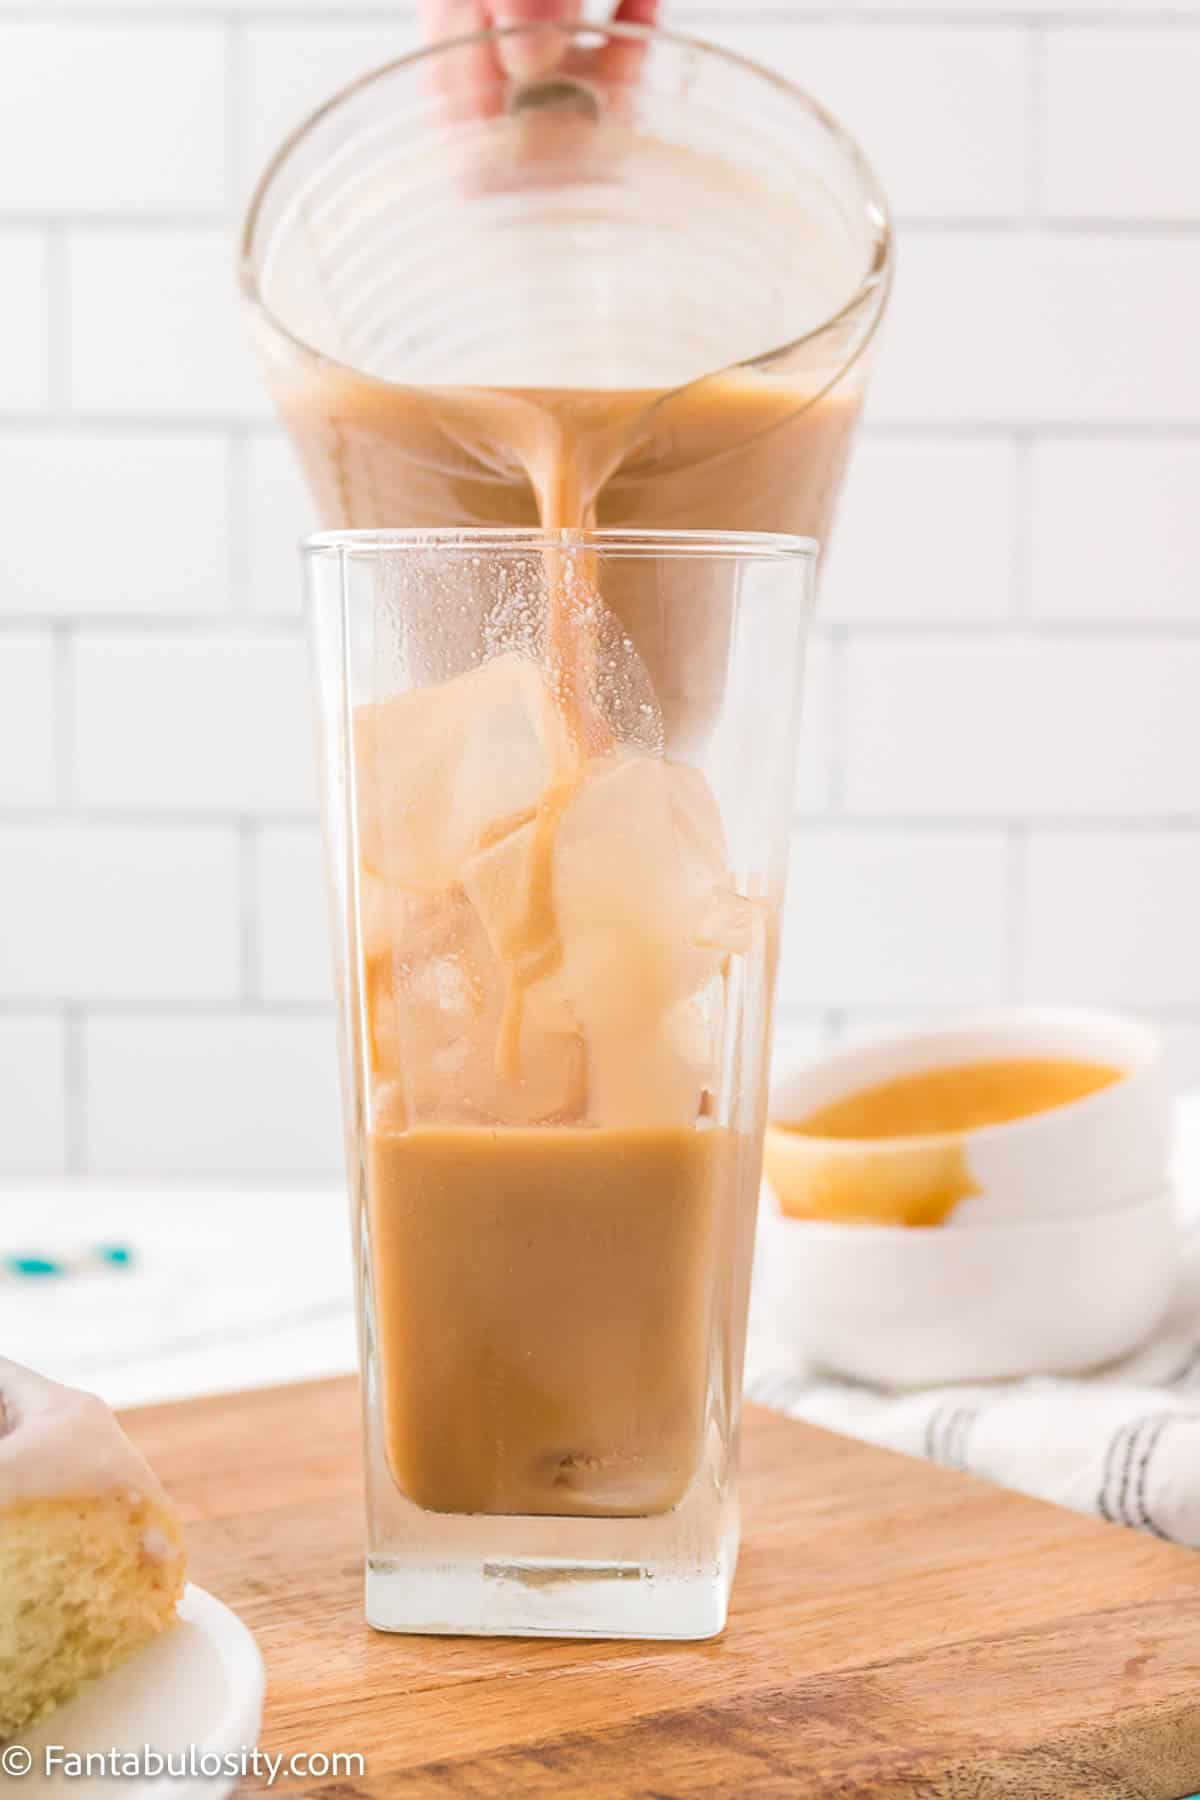 Coffee with caramel and cream is being poured into a tall glass full of ice